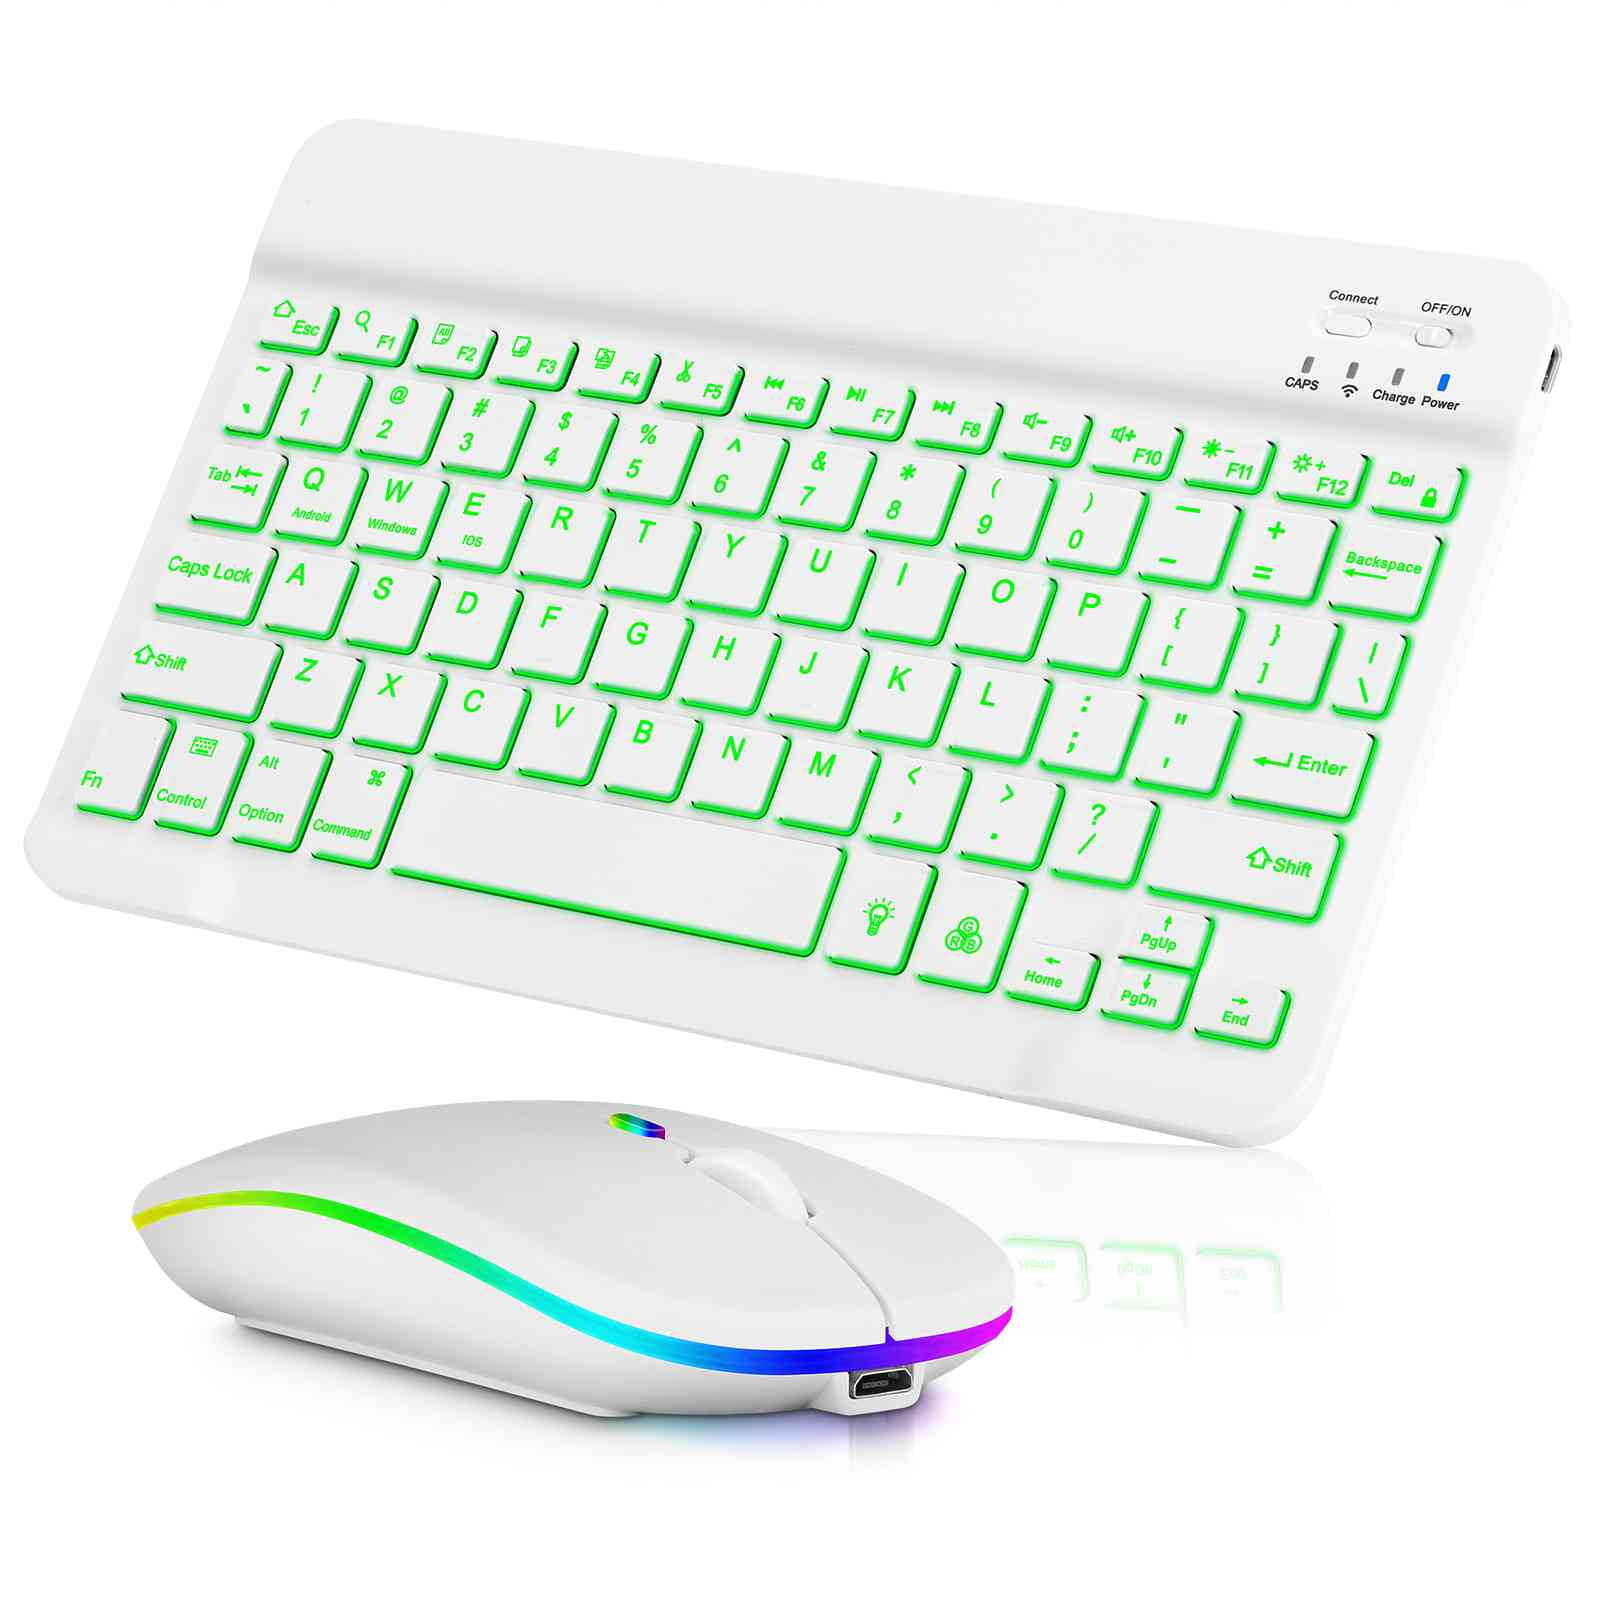 UX030 Lightweight Keyboard and Mouse with RGB Light, Multi Device slim Rechargeable Keyboard Bluetooth 5.1 and 2.4GHz Stable Connection Keyboard for iPad, iPhone, Mac, Android, Windows - Walmart.com